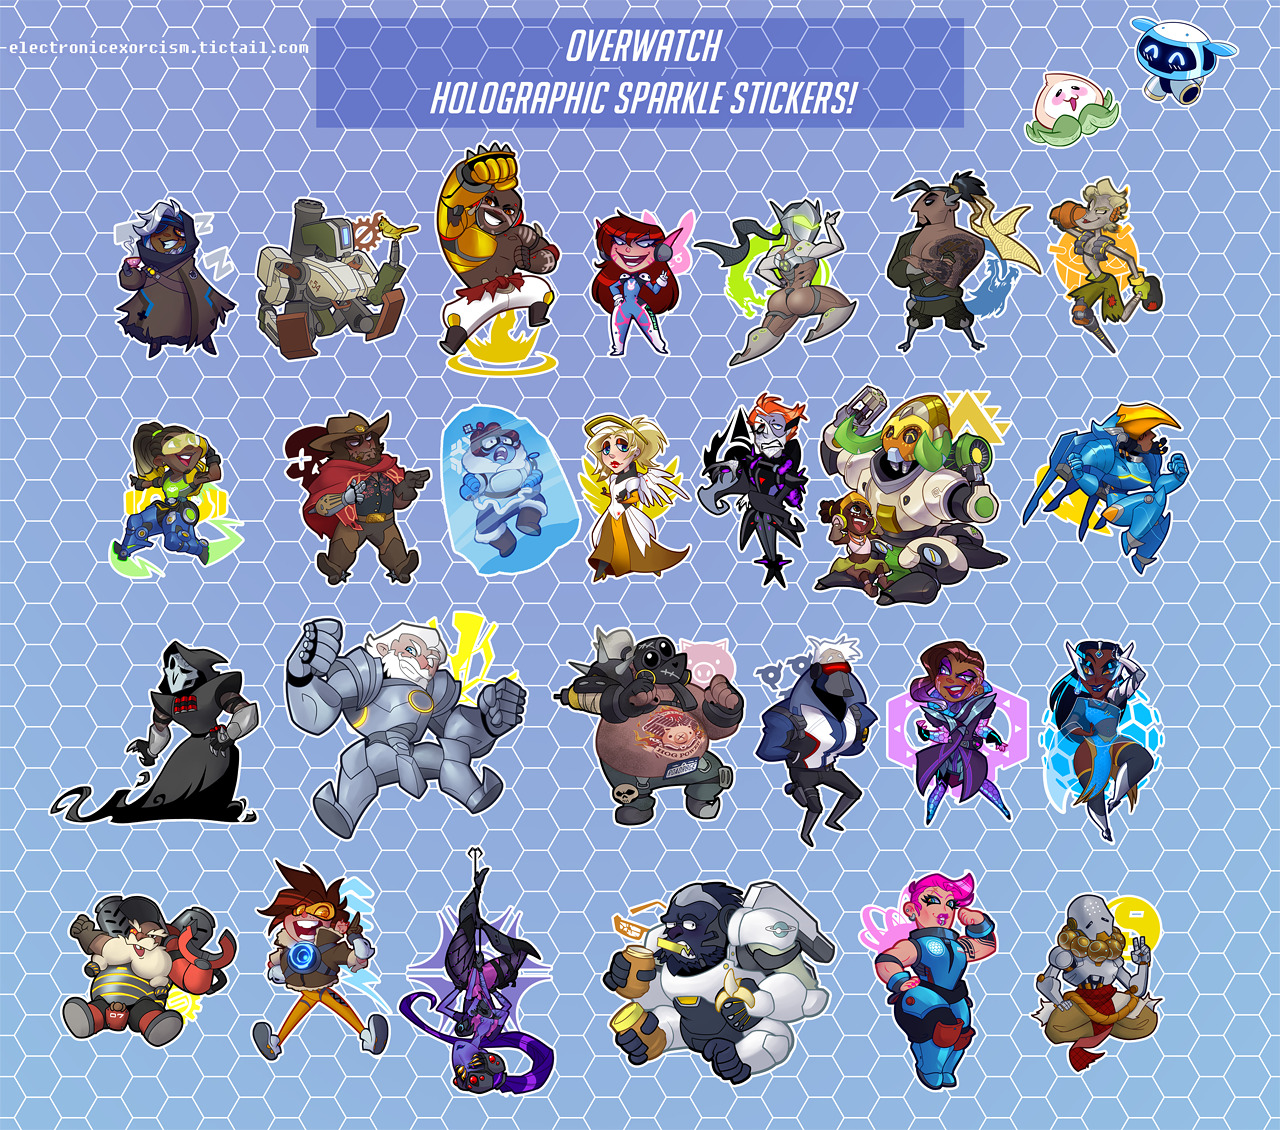 carbonoid: Store Update November 2017! Moira has been added to the classic skins